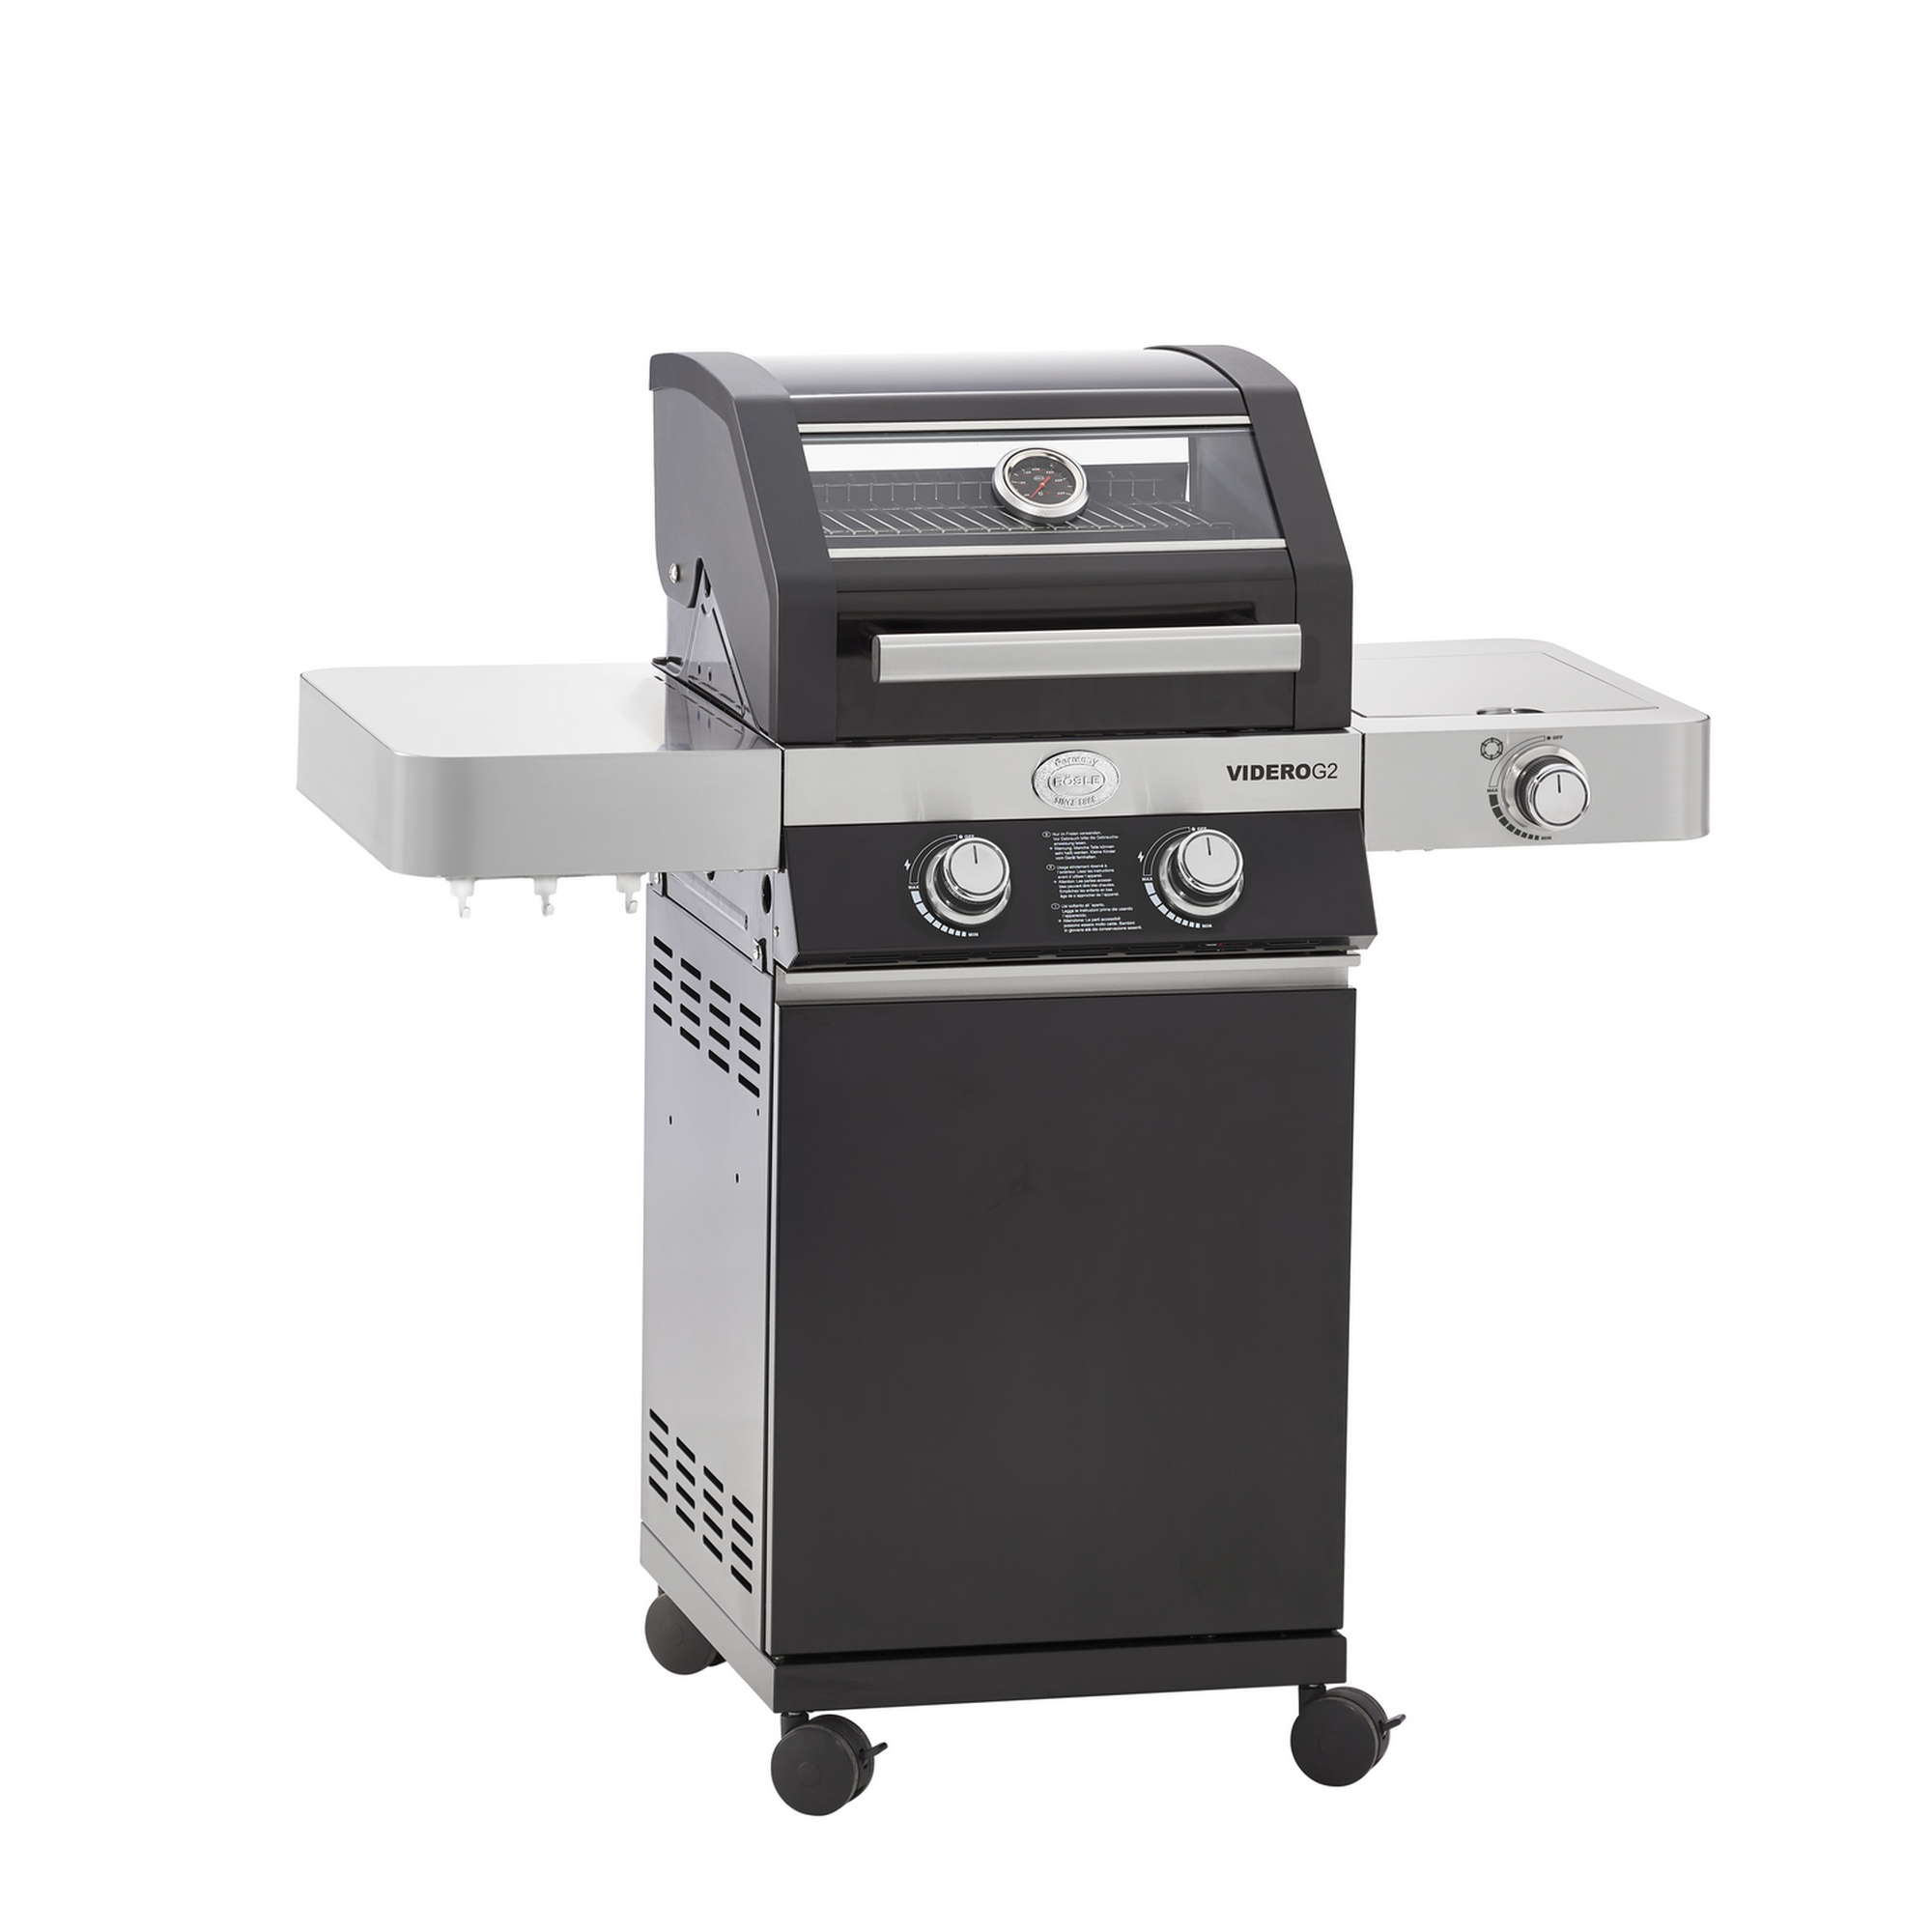 Gasgrill 'BBQ-Station Videro G2' schwarz + product picture